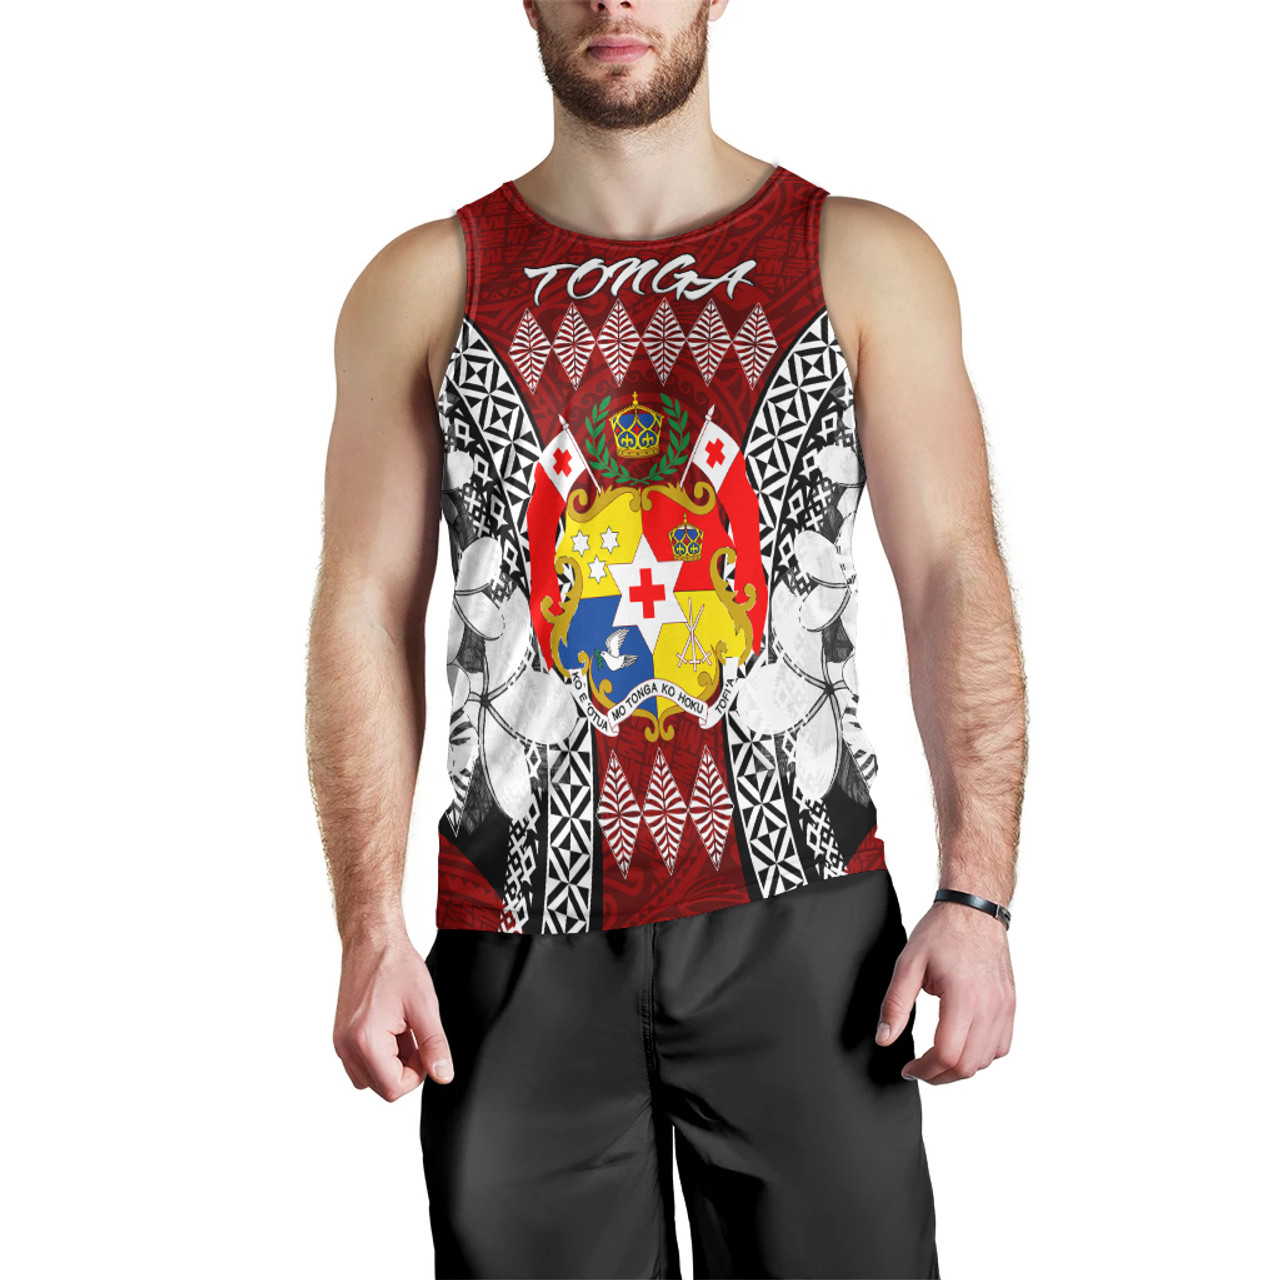 Tonga Men Tank Top - Pattern Inspired By Tonga And Polynesian With Coat Of Arms